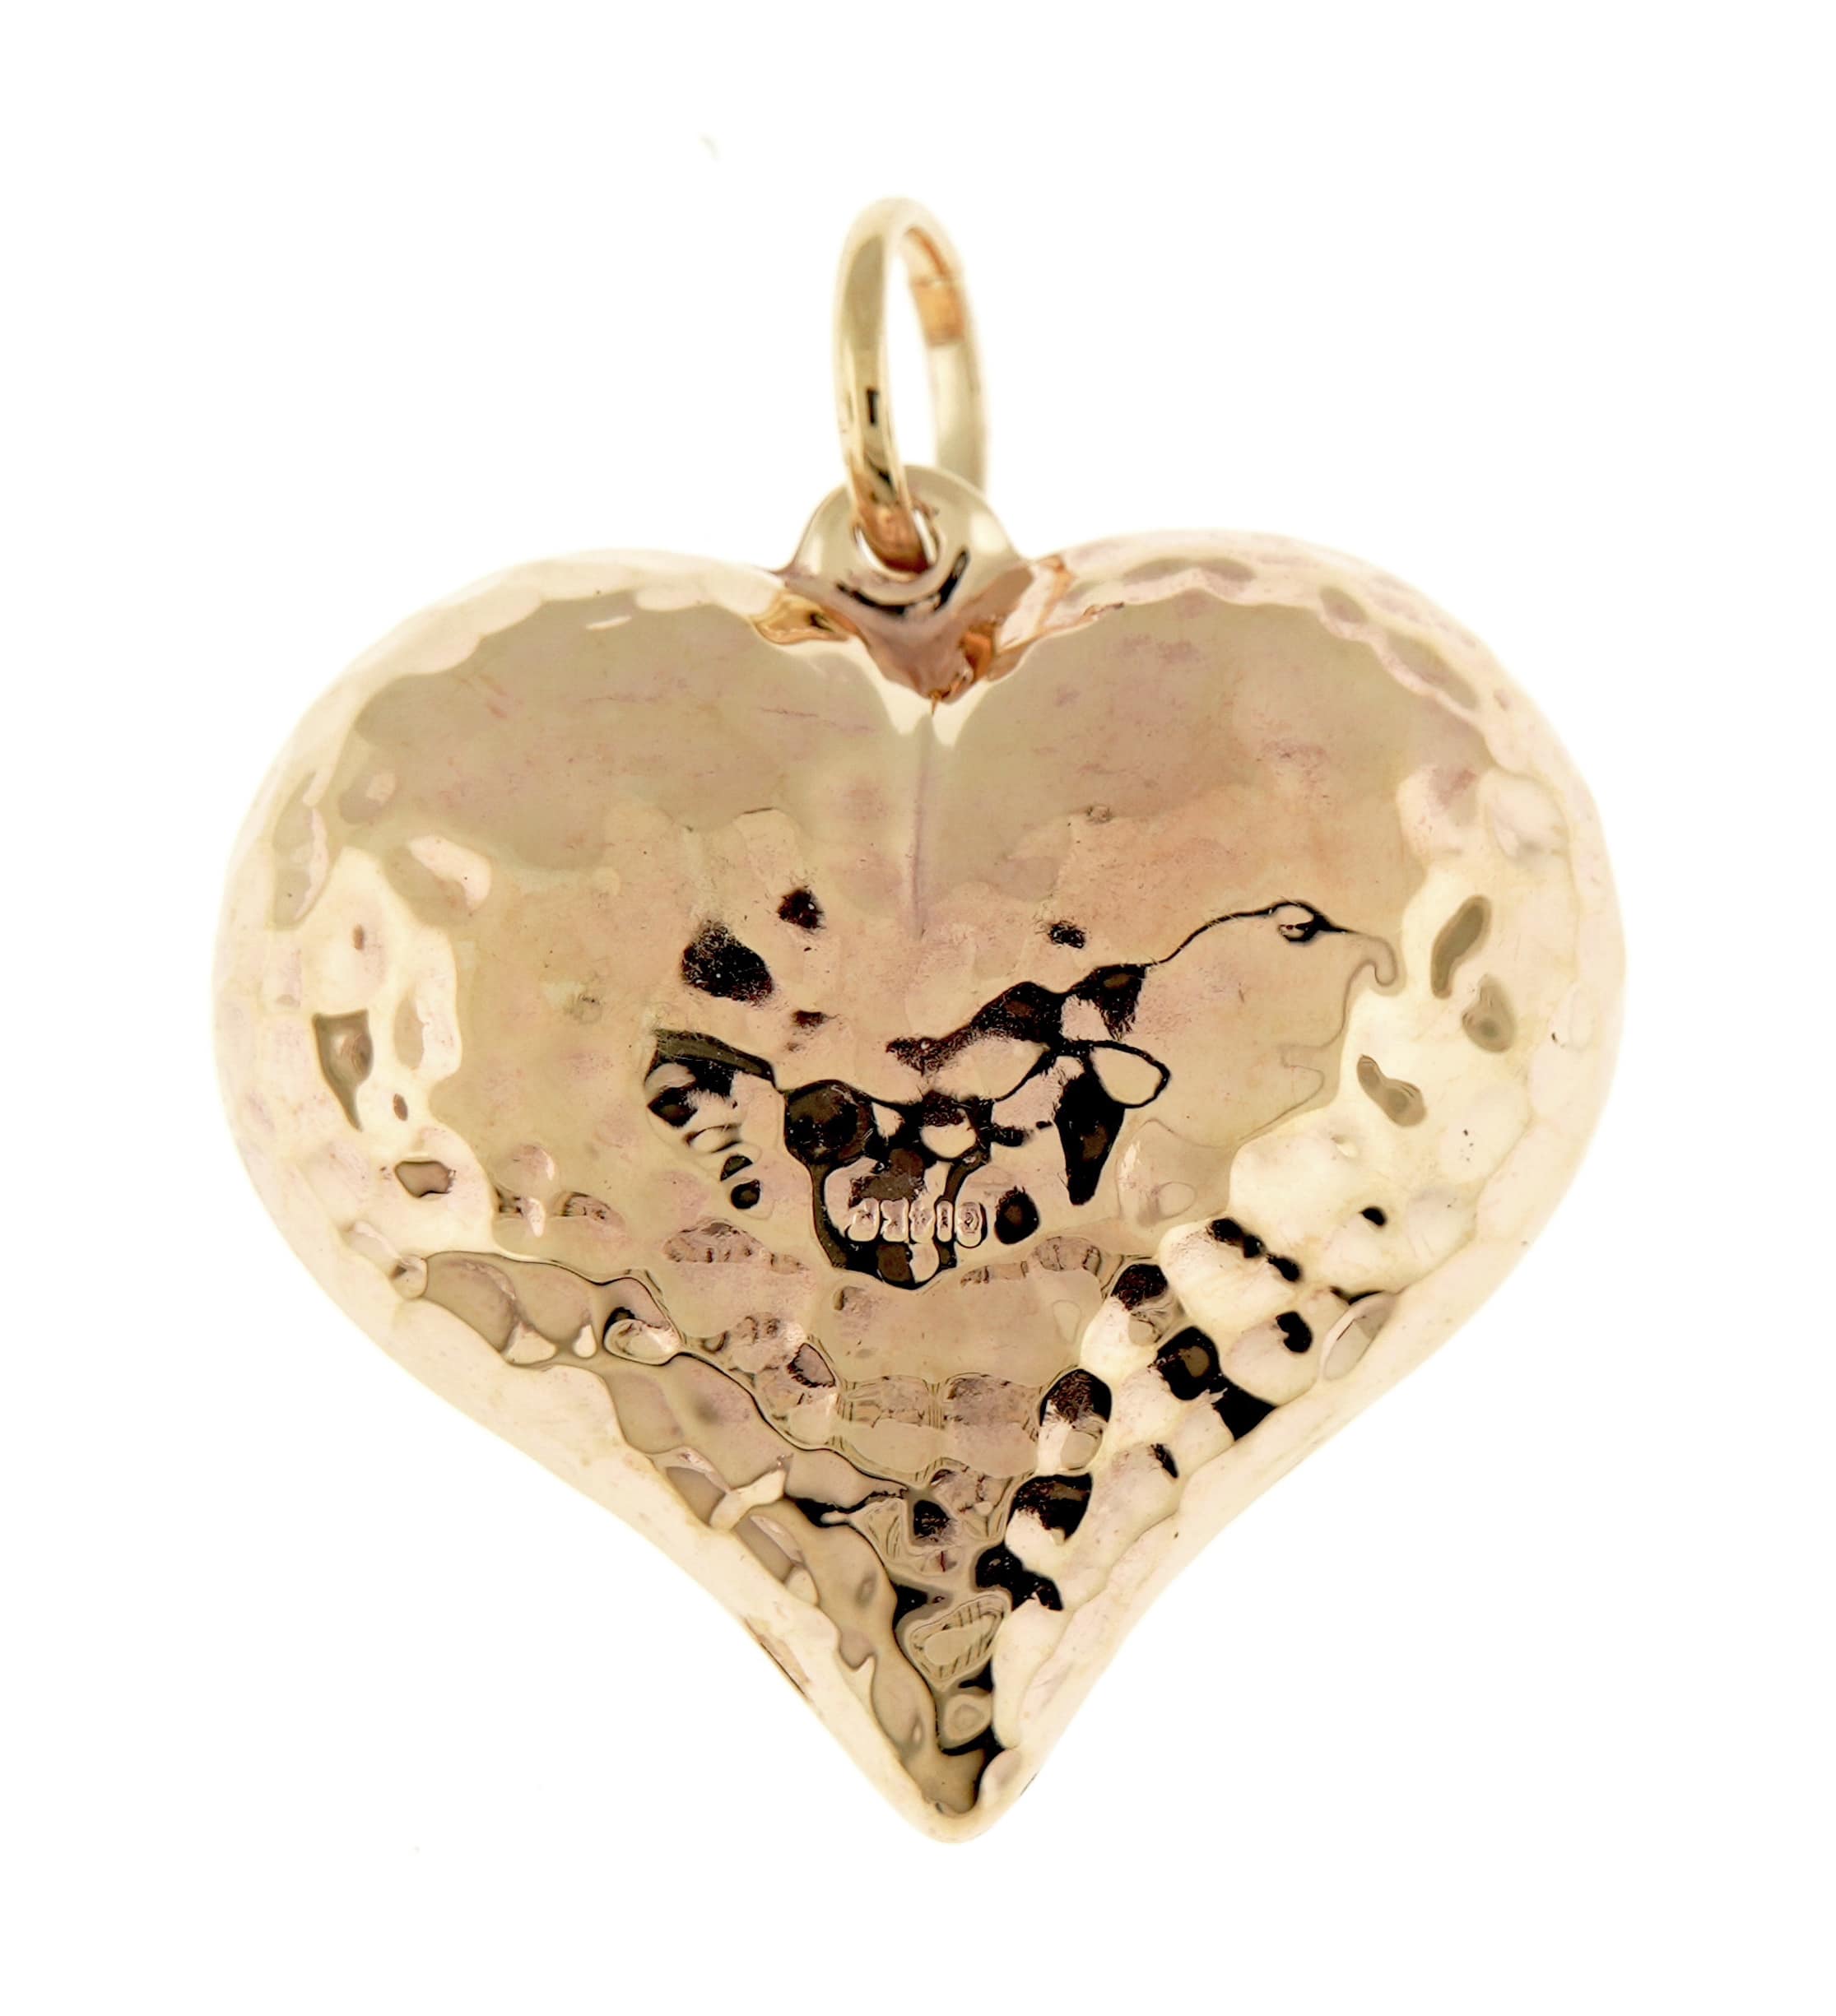 14K Yellow Gold Puffy Hammered Heart 3D Hollow Large Pendant Charm